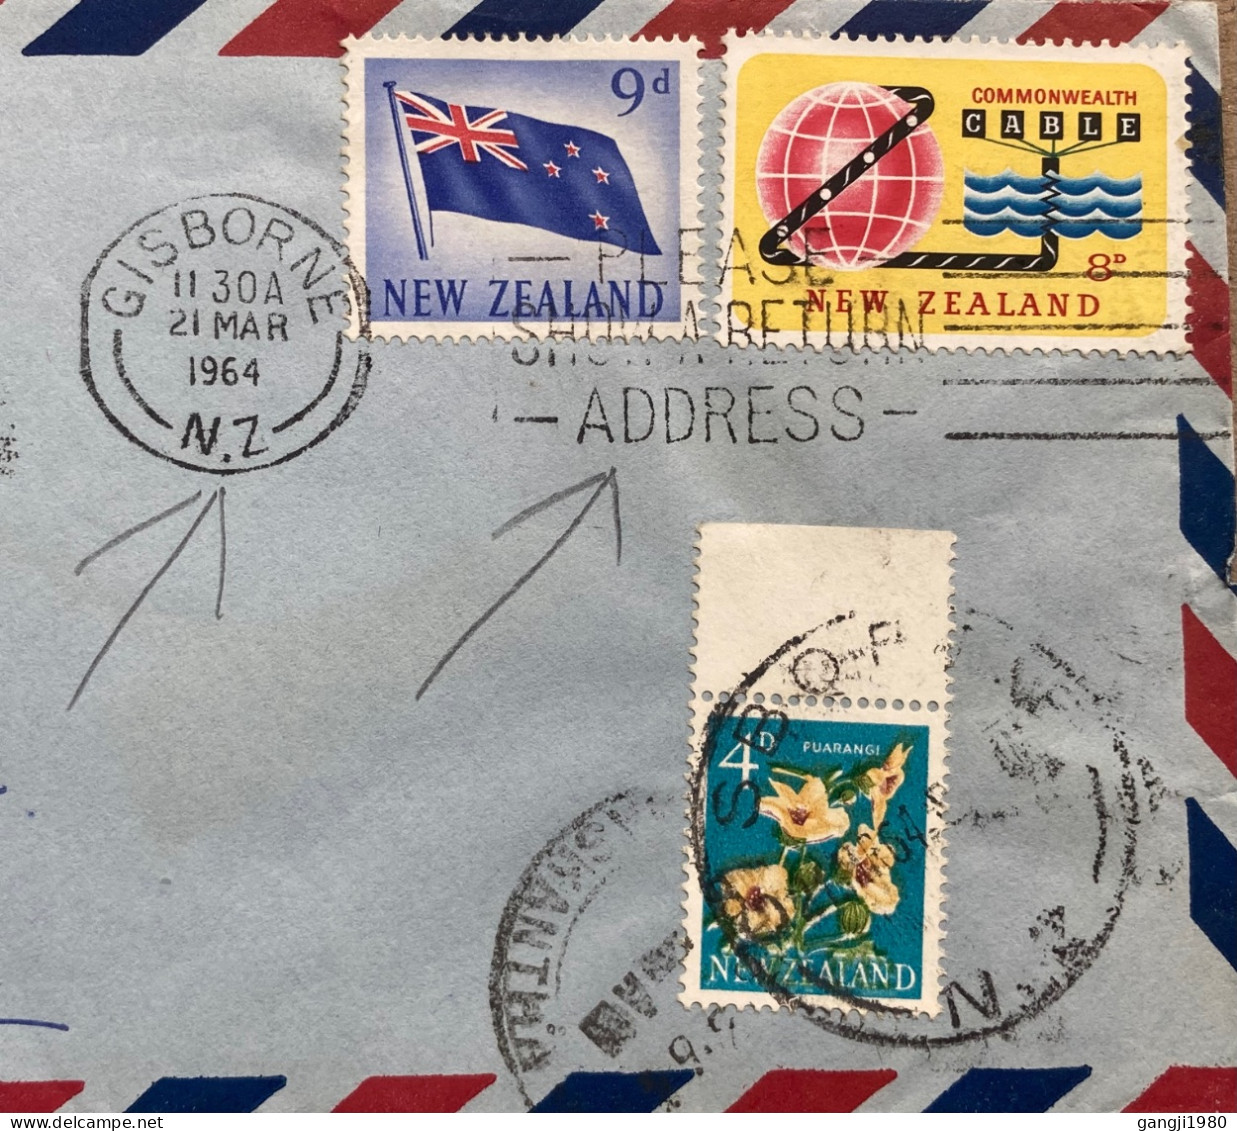 NEW-ZEALAND 1964, COVER USED TO INDIA, 3 DIFF STAMP, FLAG, CABLE, FLOWER, GISBORNE CITY SLOGAN, PLEASE SHOW RETURN ADDRE - Cartas & Documentos